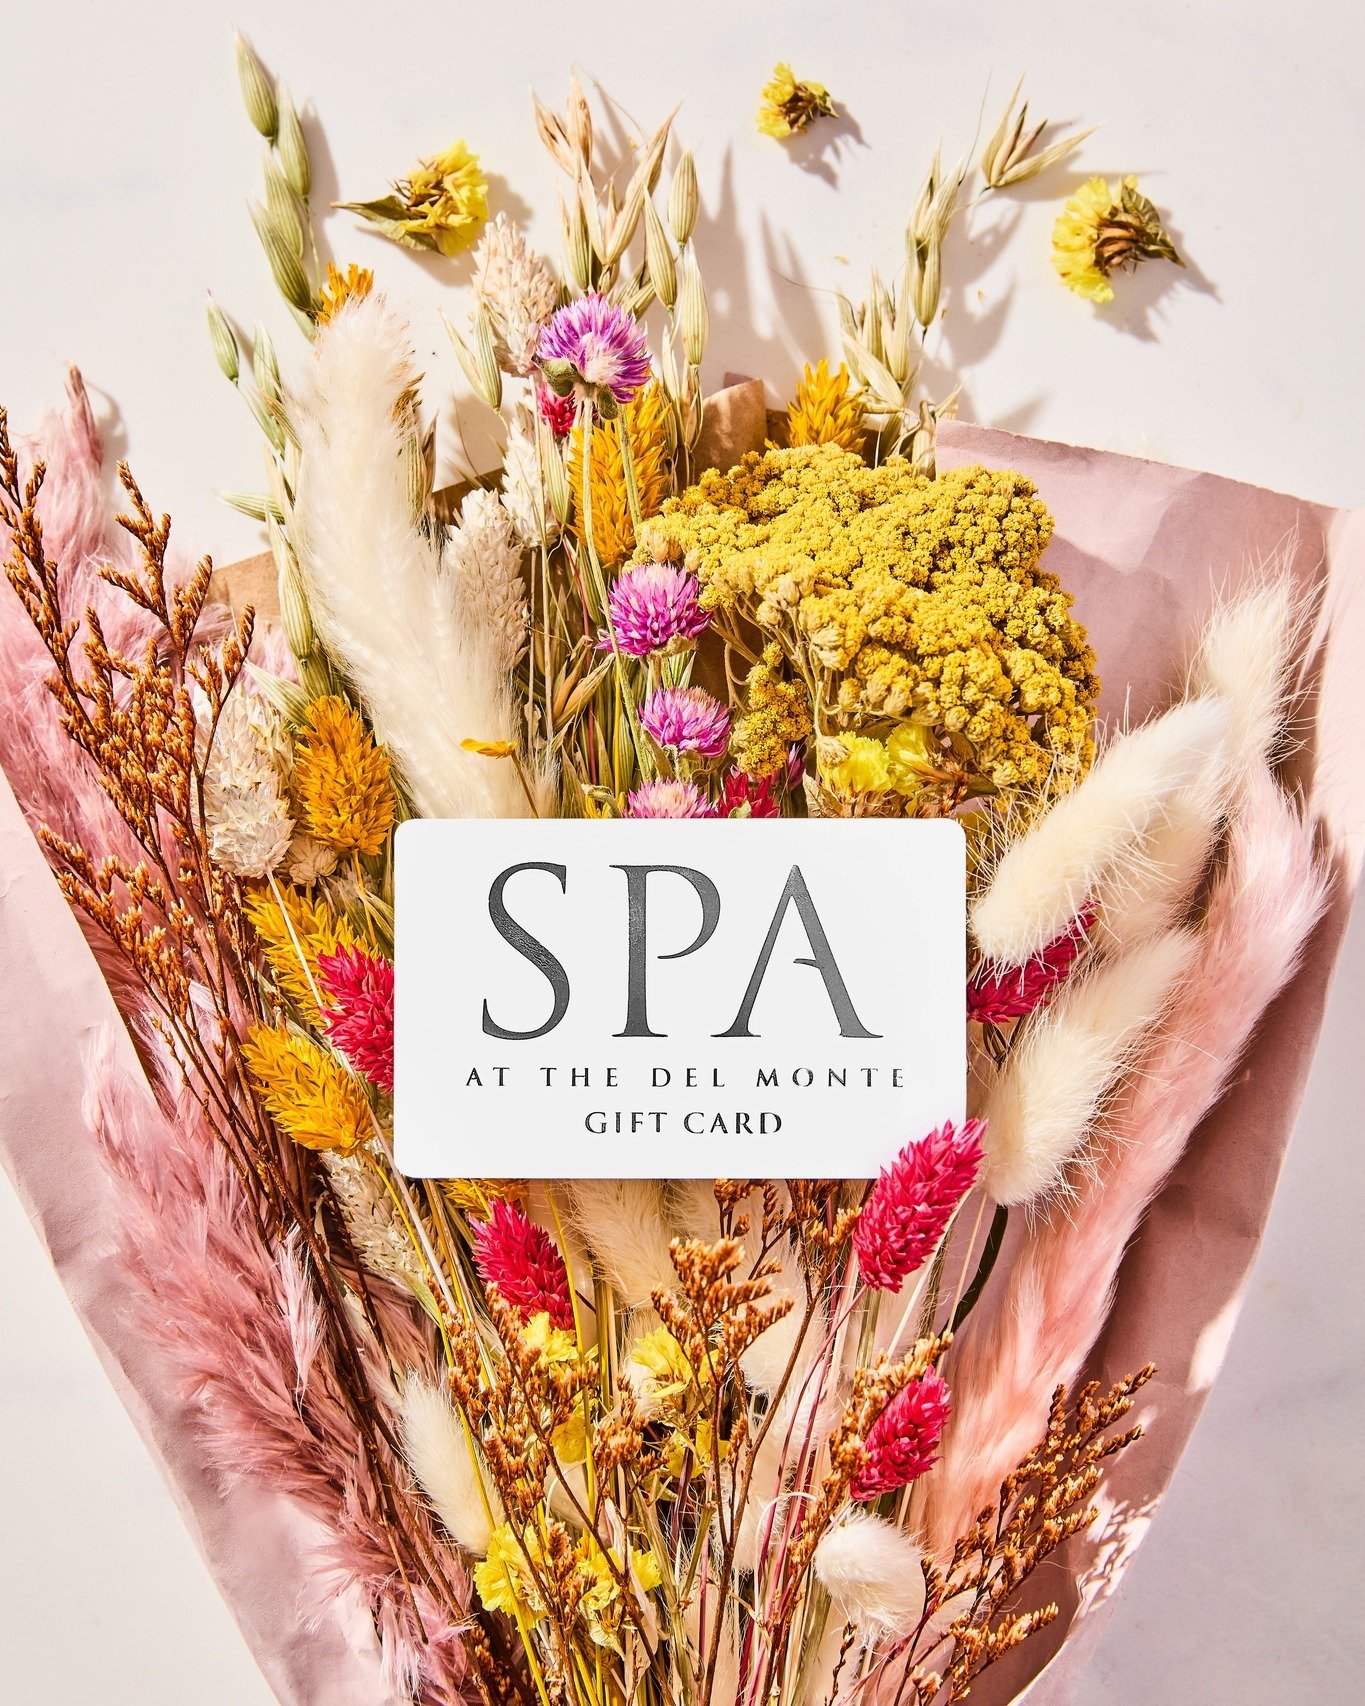 Happy Mother's Day, Mom!💖🥰
.
.
.
It's not too late, you can still purchase a gift card to the Spa at the Del Monte online or in store today!
.
#delmontespa #skinhealth #spalife #spalife #spa #dayspa #pittsford #skincare #shoplocal #treatyourself #p